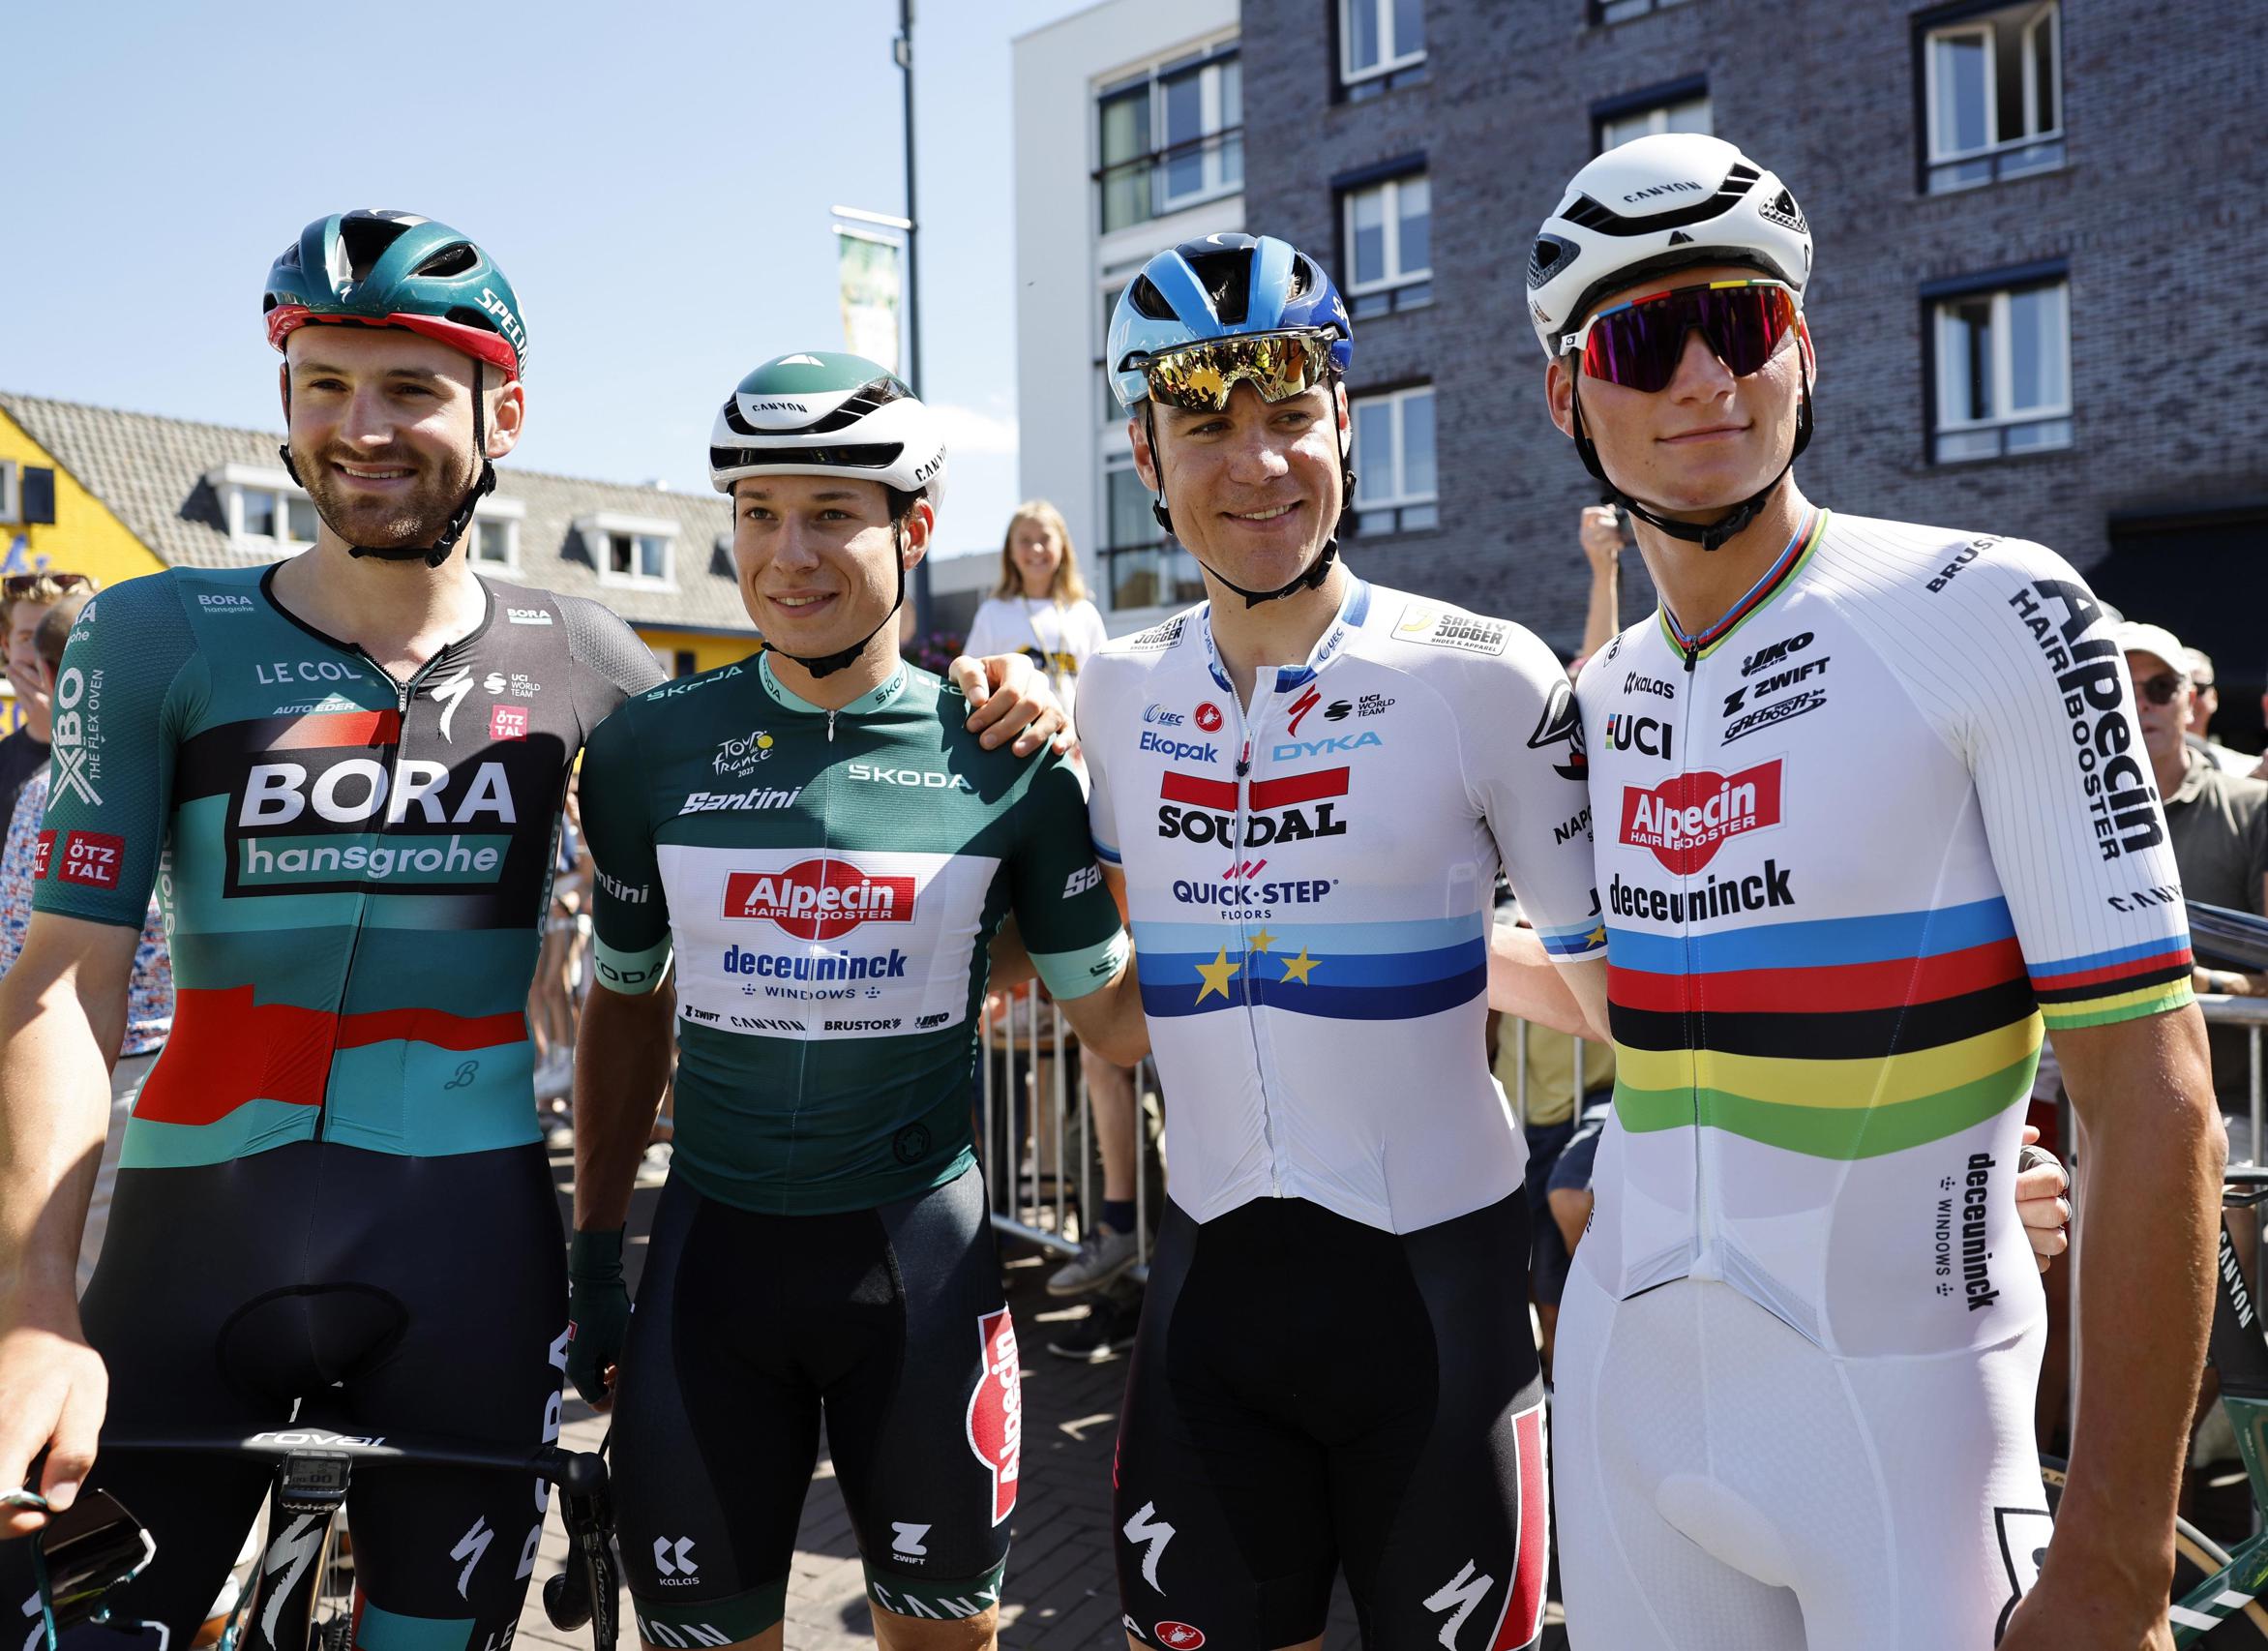 ETTEN-LEUR - World champion Mathieu van der Poel during the Pro Cycling  Tour Etten-Leur. Van der Poel shows for the first time his rainbow jersey  that he won during the World Cycling